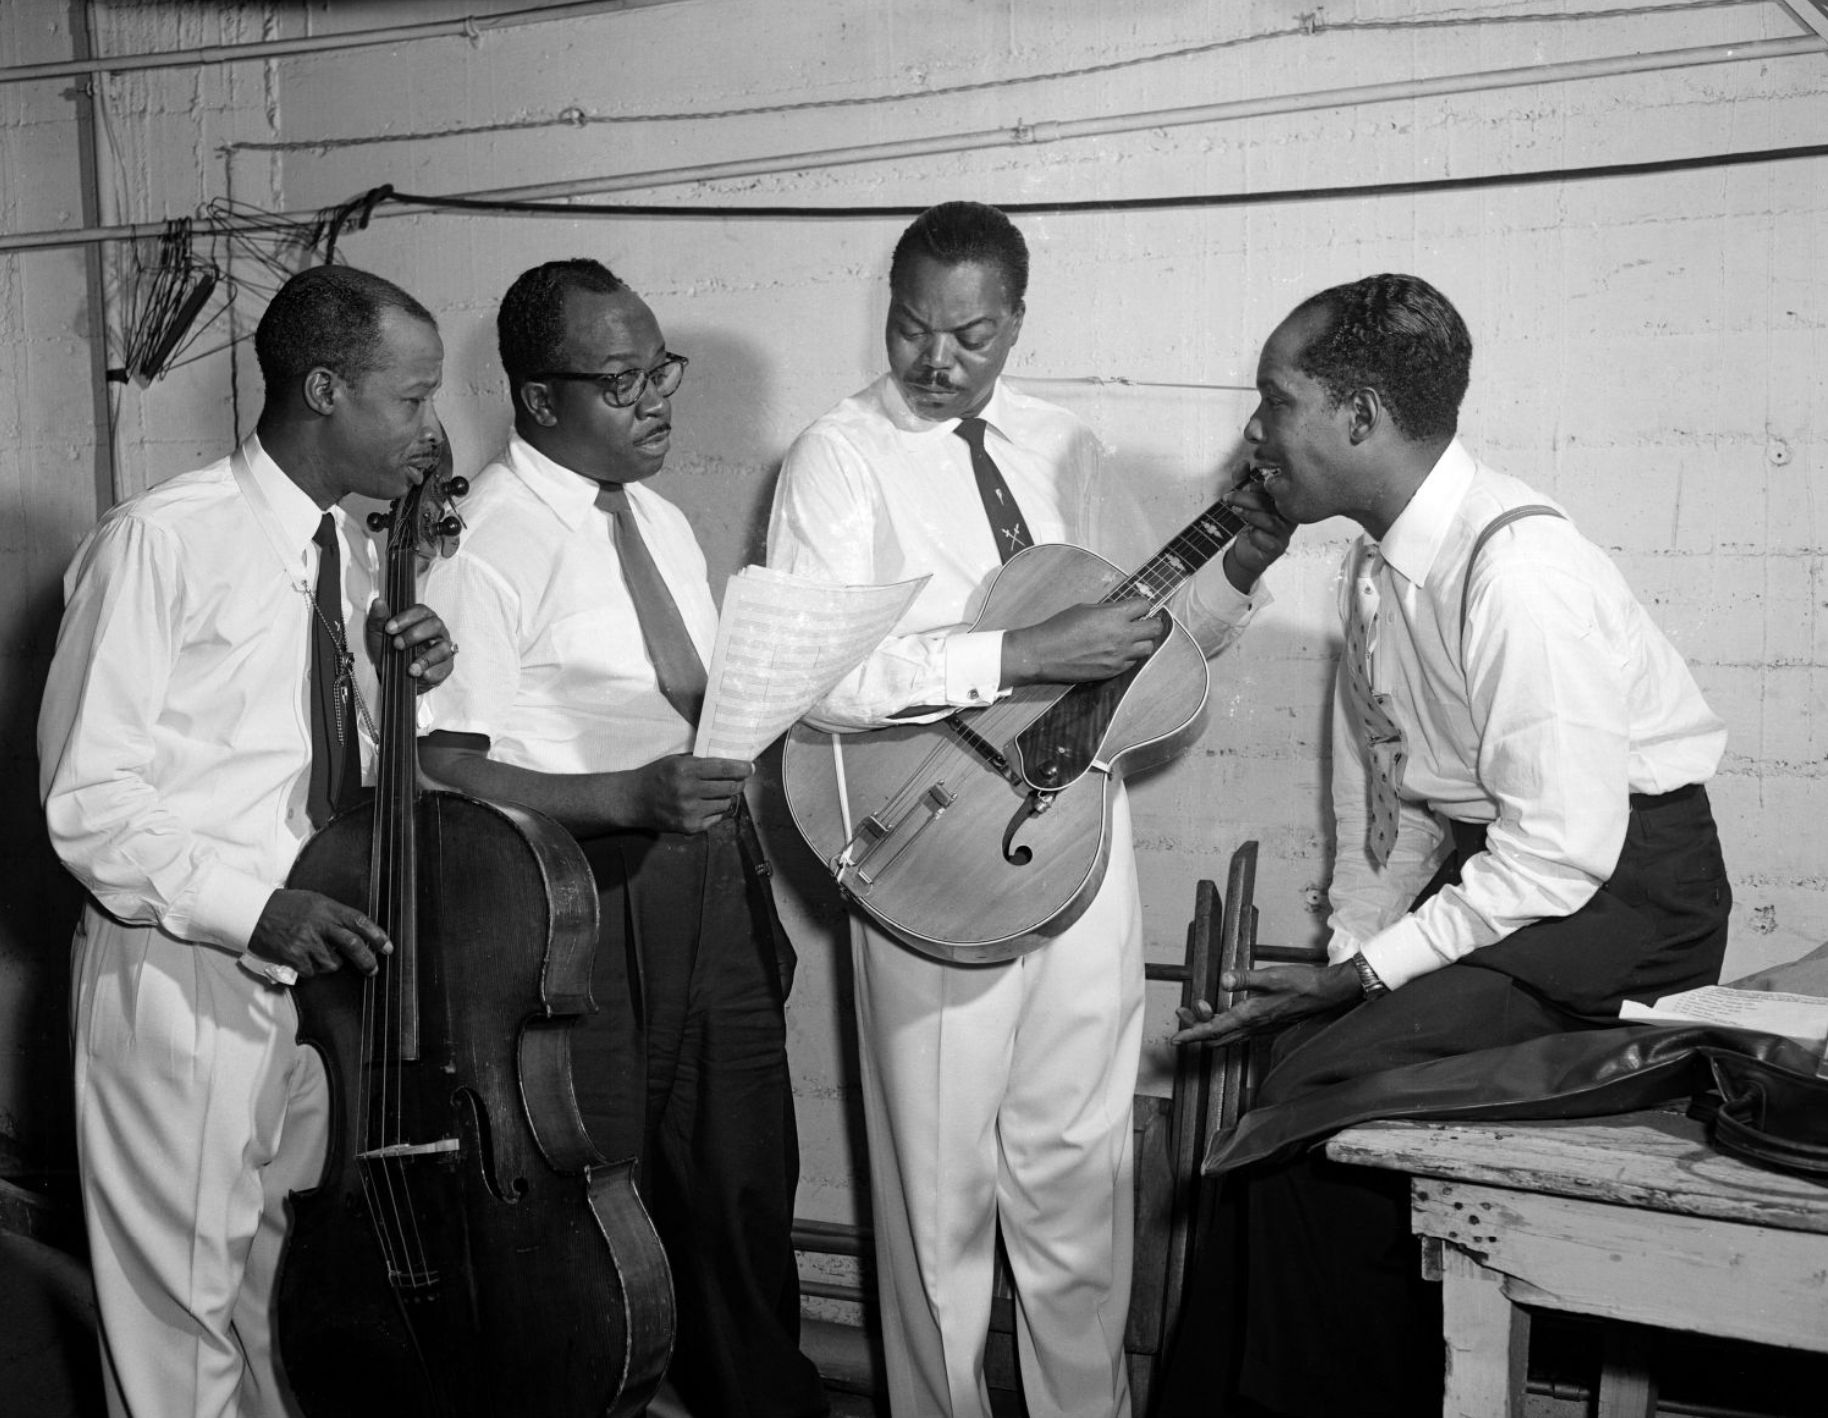 Four men stand together and look at sheet music.